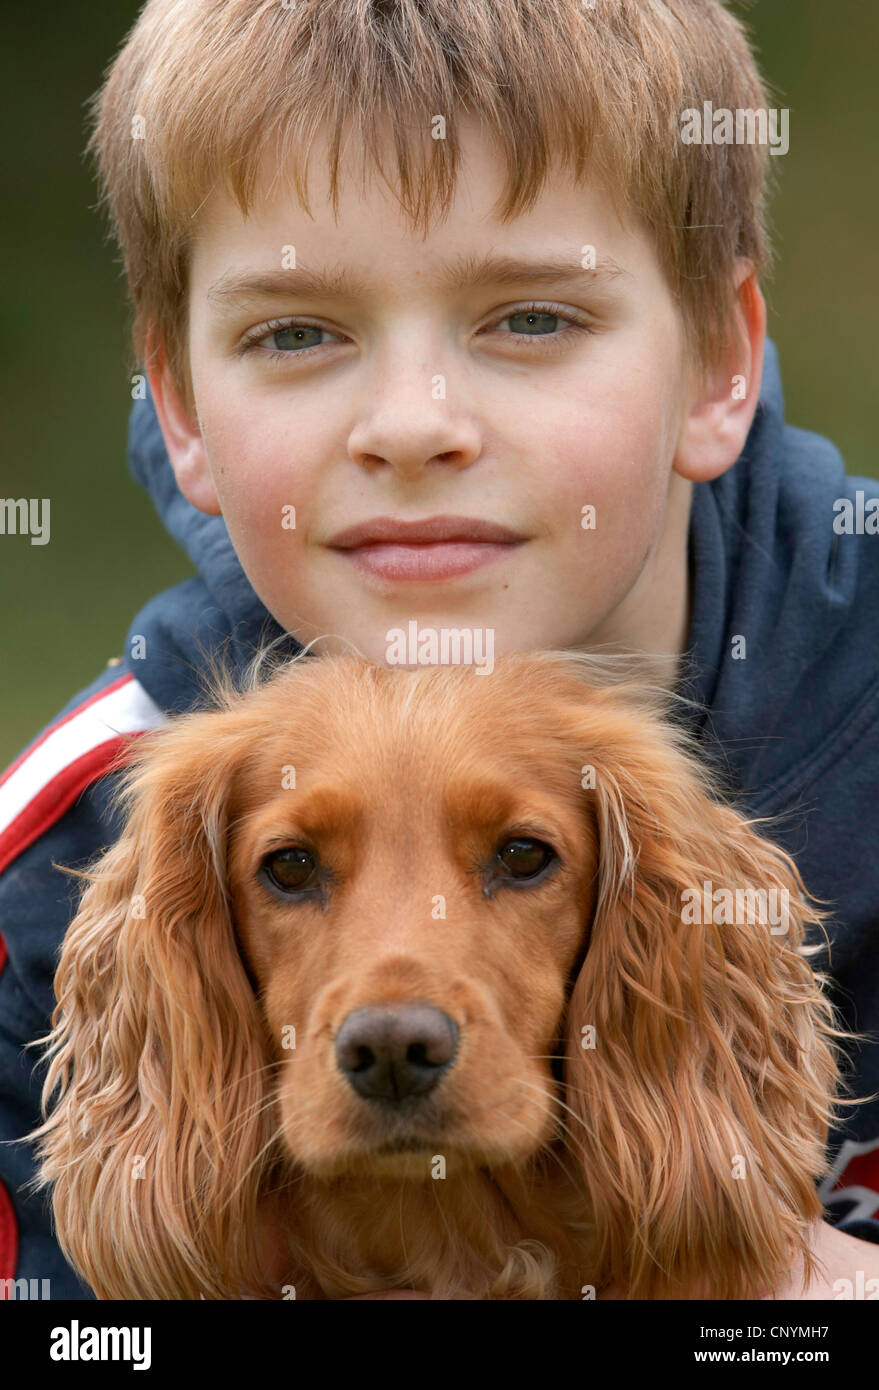 English Cocker Spaniel (Canis lupus f. familiaris), portrait of a young boy and his dog Stock Photo